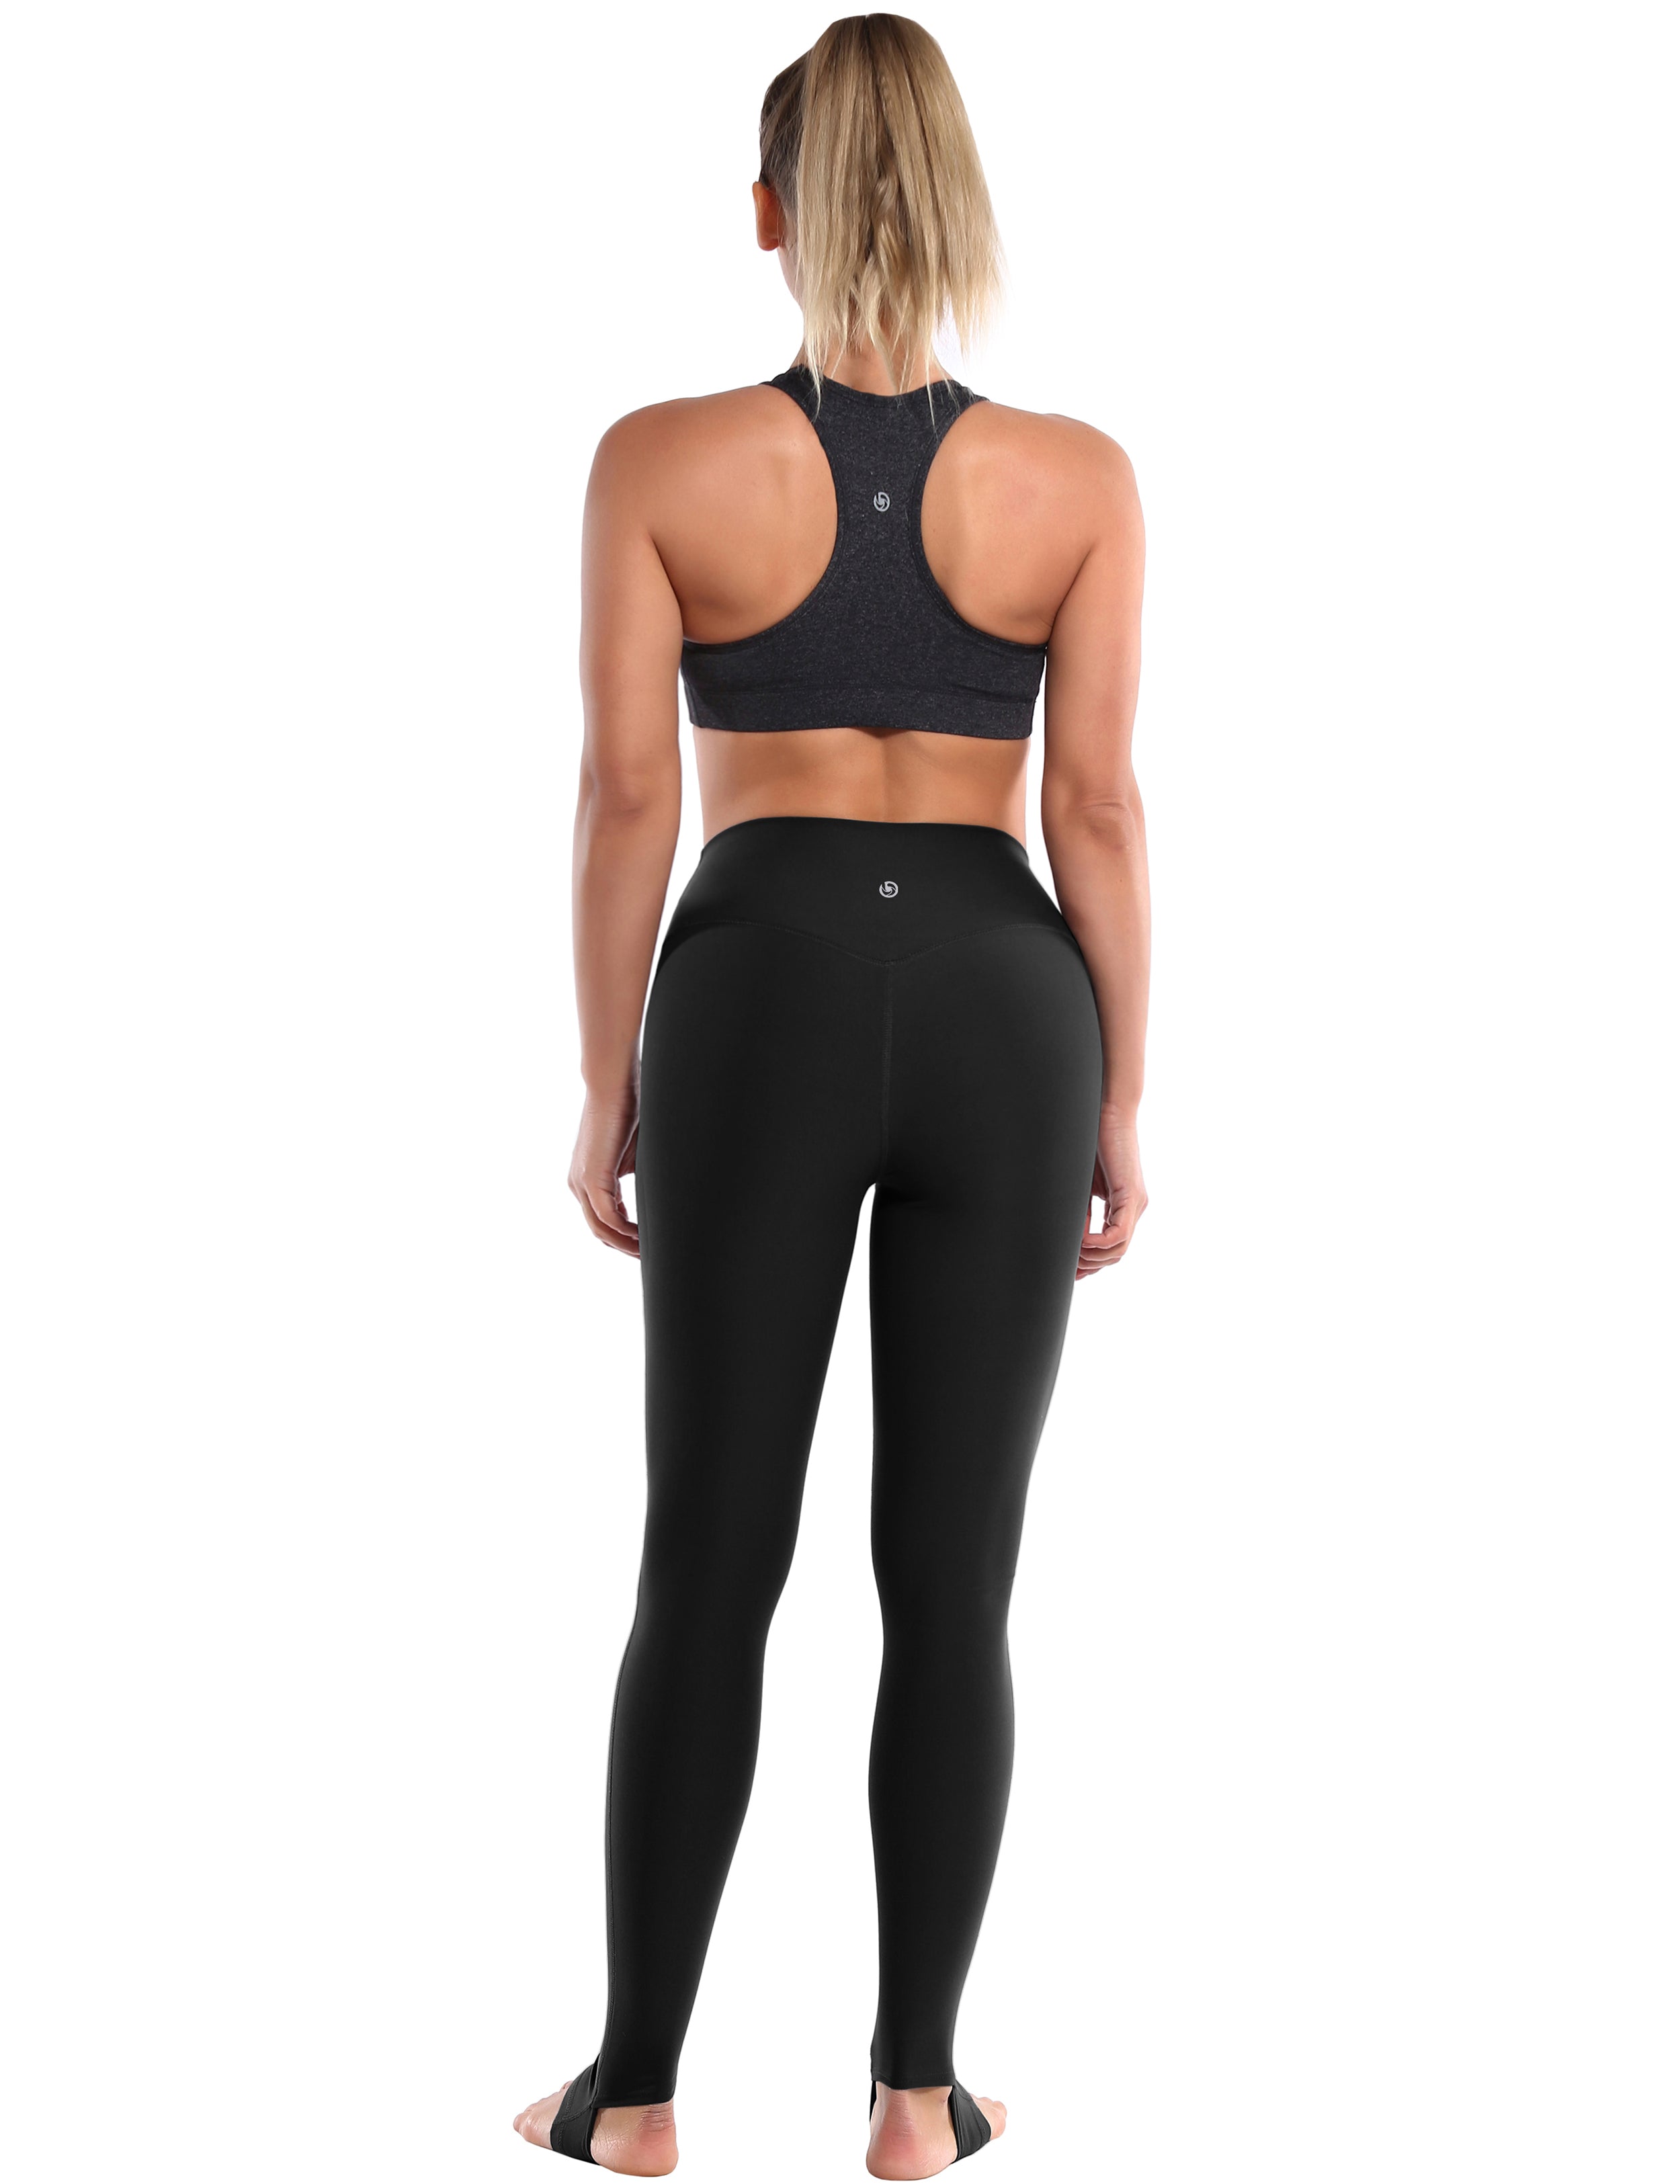 Over the Heel Yoga Pants black Over the Heel Design 87%Nylon/13%Spandex Fabric doesn't attract lint easily 4-way stretch No see-through Moisture-wicking Tummy control